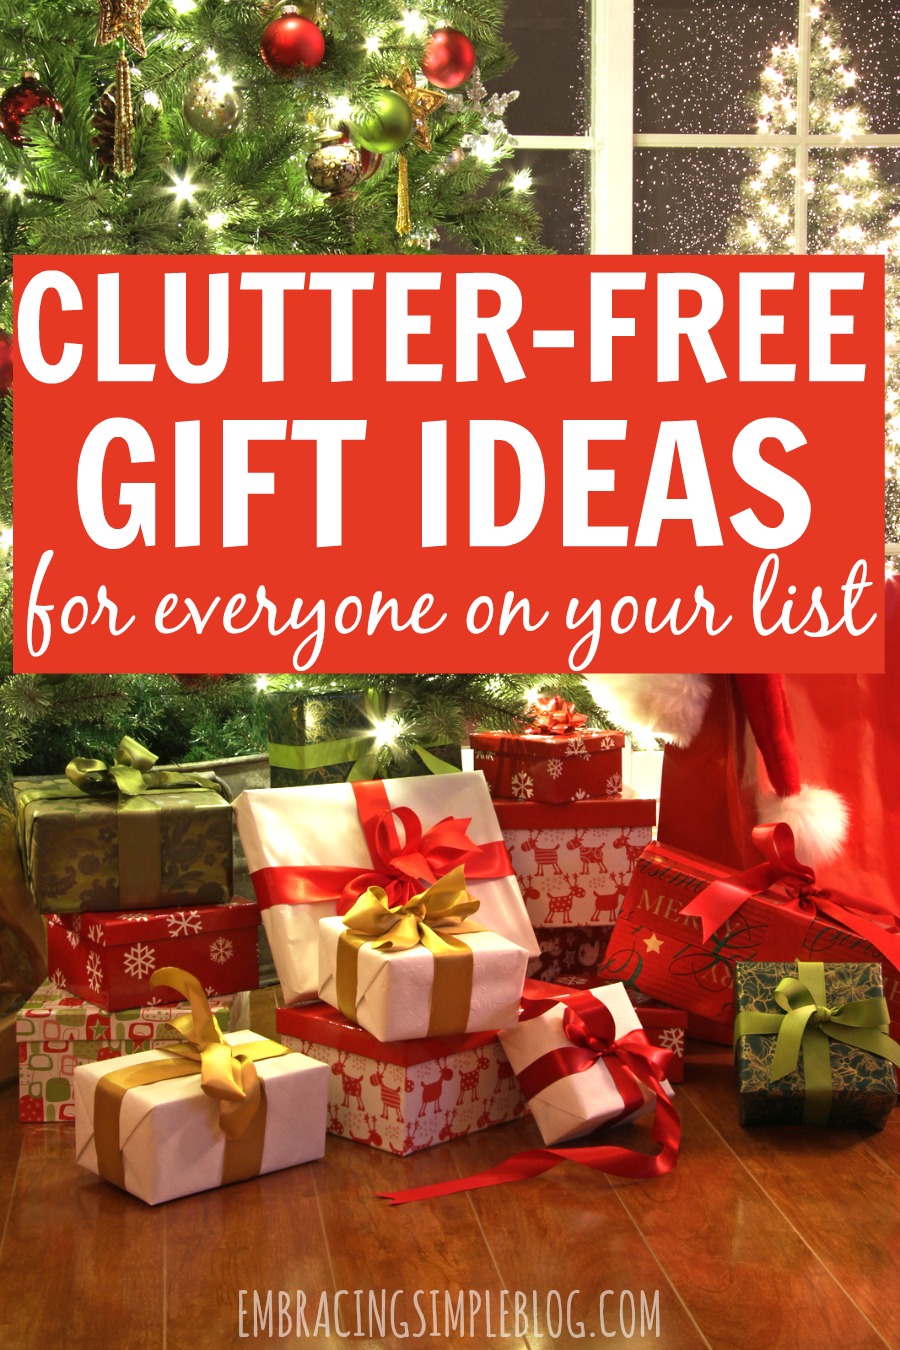 Tired of giving the same old gifts that just end up as clutter around the recipient's home? Don't miss the ultimate clutter-free gift guide for awesome gift ideas that you will be proud to give! This guide includes gifts for everyone on your list - women, men, babies, toddlers, children, and teenagers. It's a must-read!